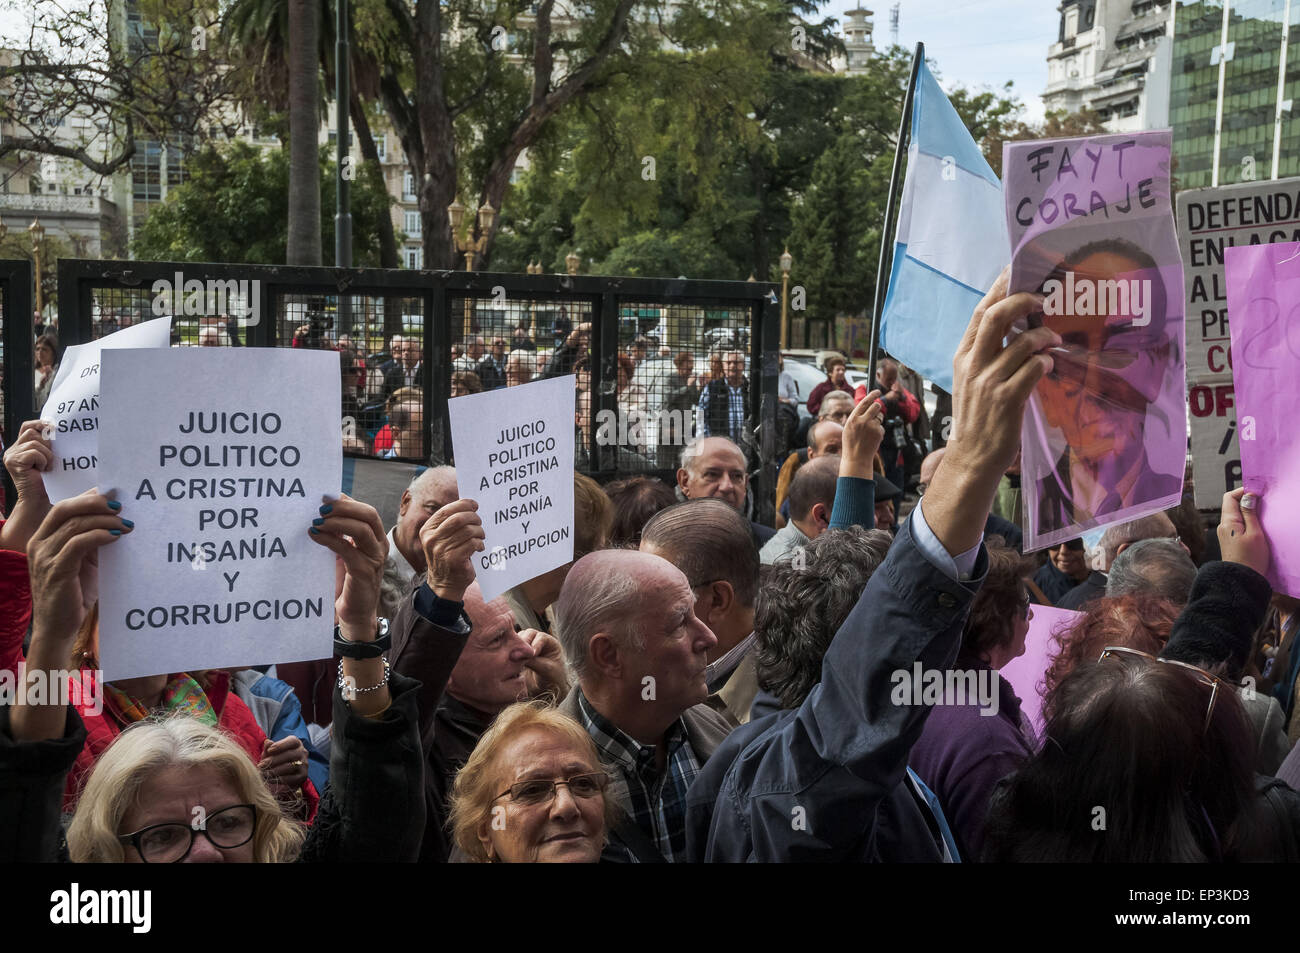 Buenos Aires, Buenos Aires, Argentina. 13th May, 2015. A demo is held in front of the Courthouse to support Supreme Court Judge Carlos Fayt (97), whose ability to continue performing his duties is being questioned by the government of President Cristina Fernandez Kirchner. Demonstrators also carried signs calling for the impeachment of the President and criticizing Chief of Cabinet Anibal Fernandez, one of the most visible critics of Judge Fayt from inside the government's ranks. © Patricio Murphy/ZUMA Wire/Alamy Live News Stock Photo